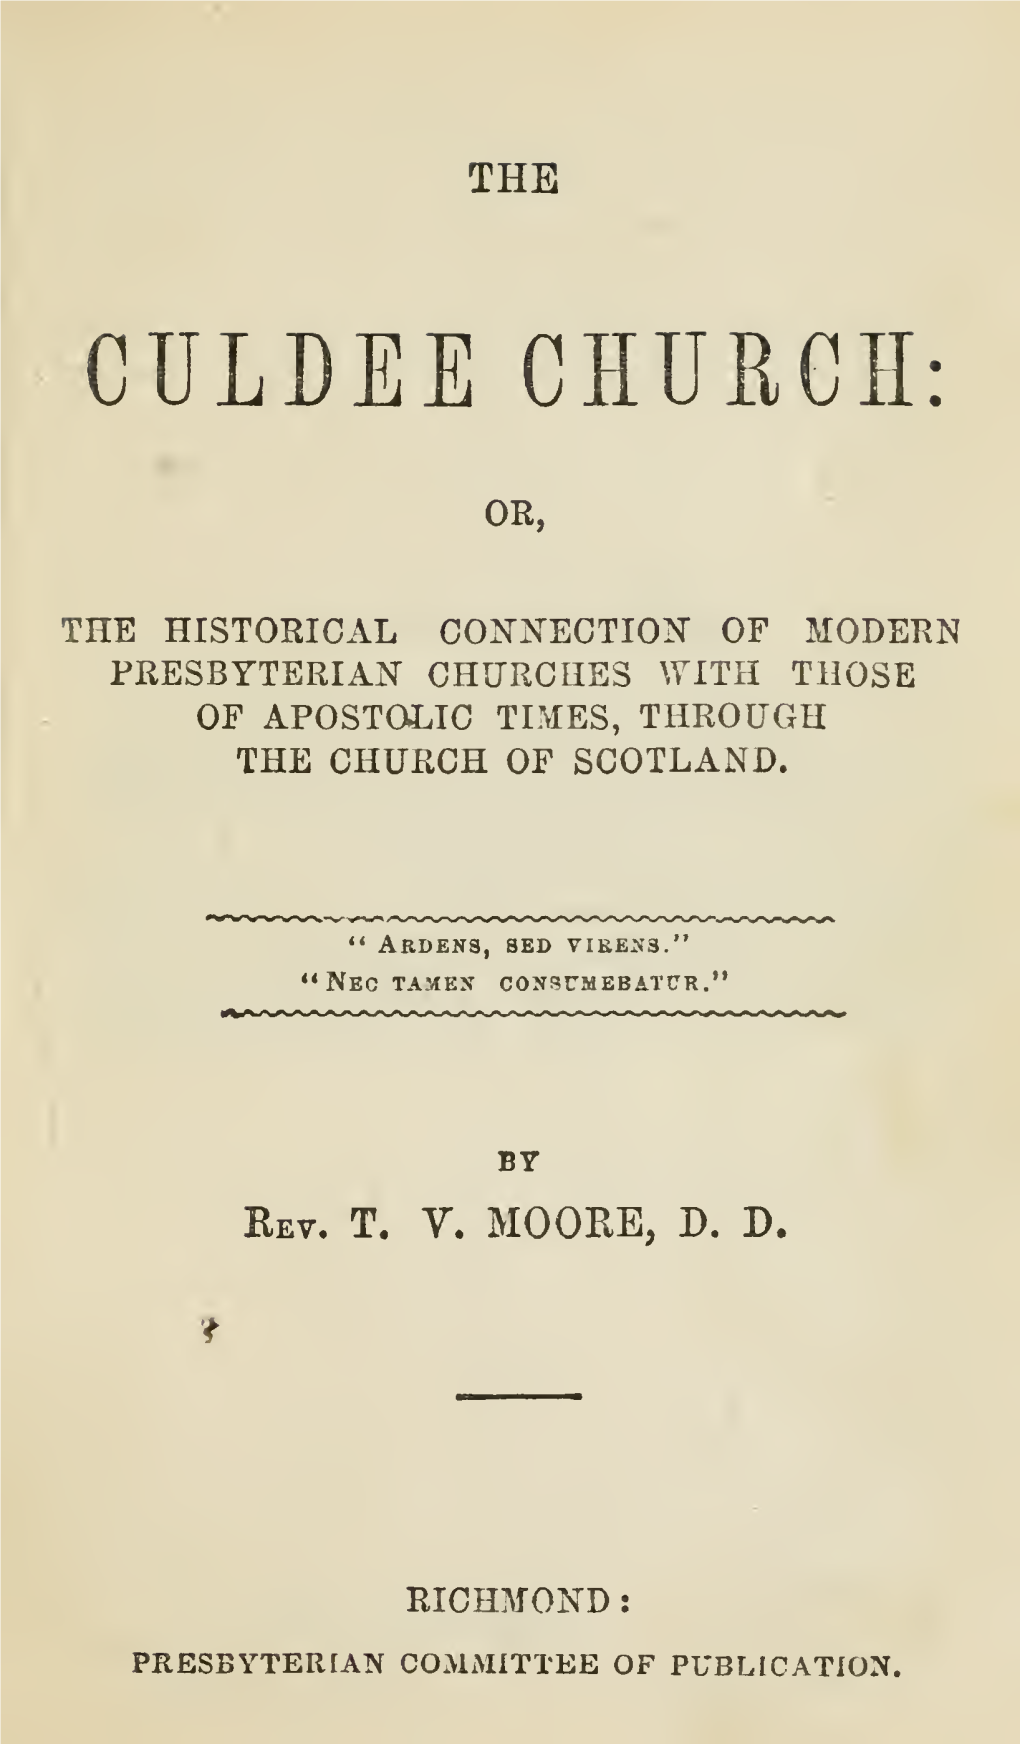 The Culdee Church Substantially Identi- Cal with Those of Modern Presbyterian Churches—Testimony of Historians